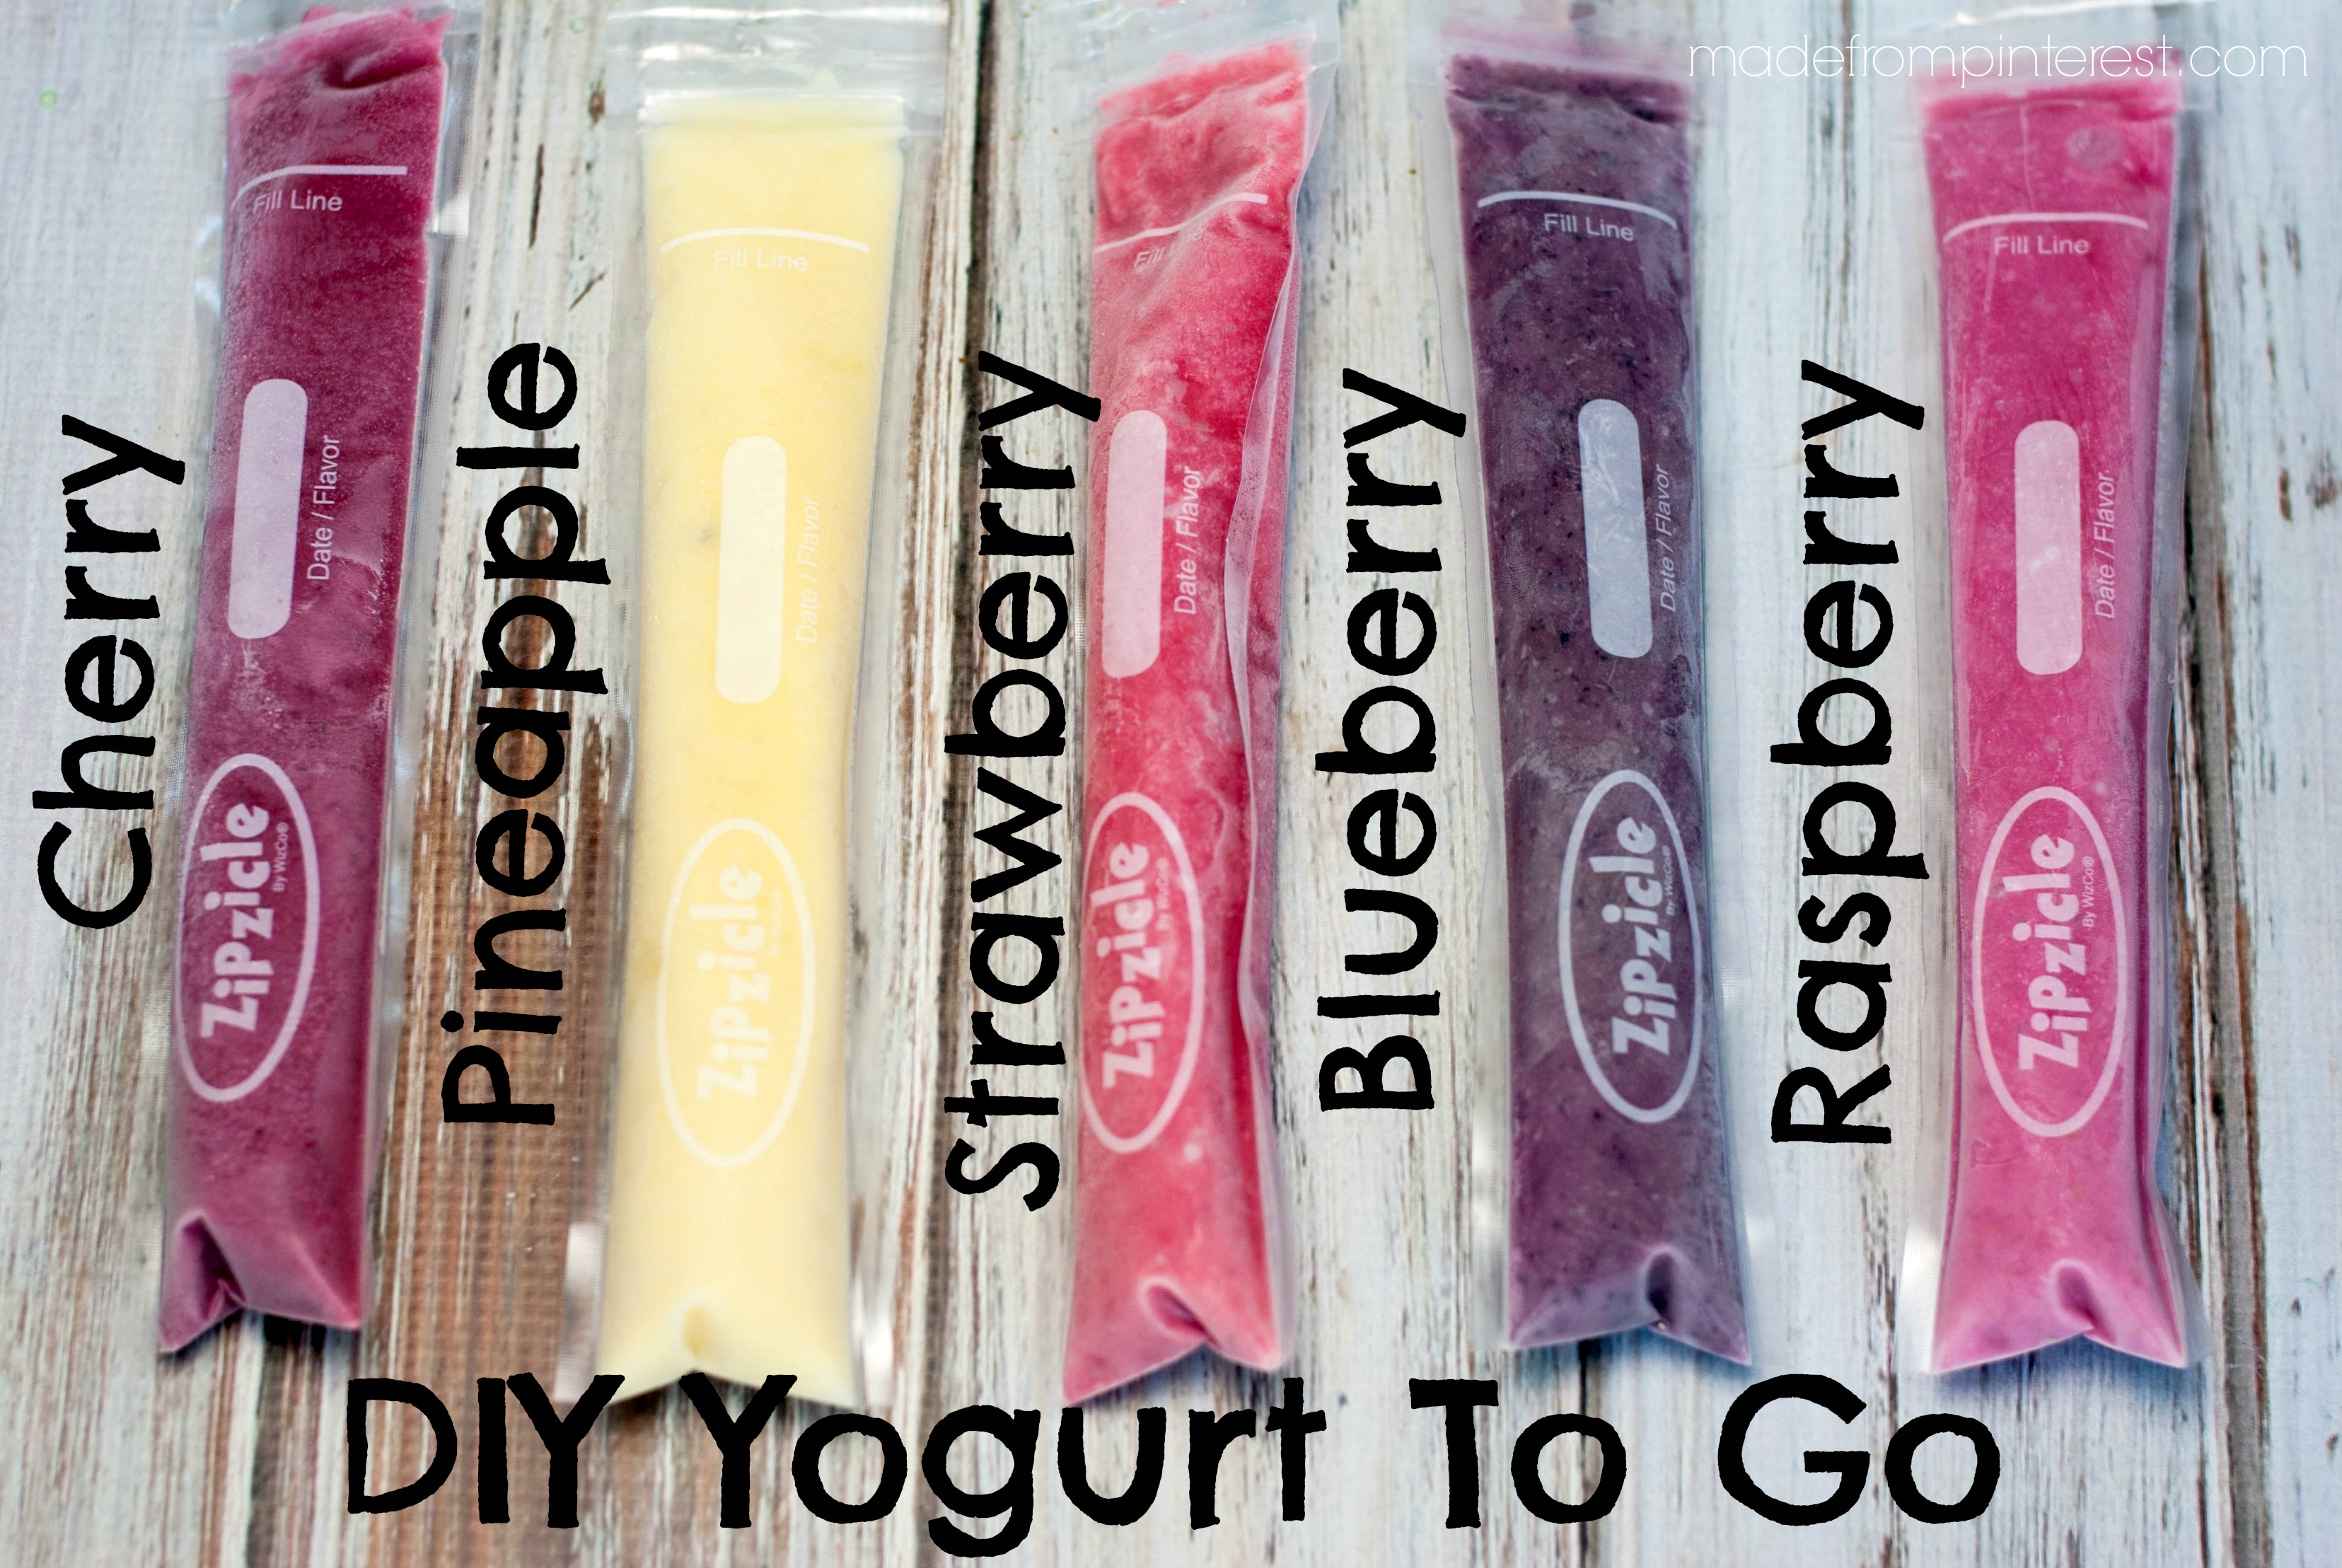 Your kids are going to gobble up these portable yogurts. They are full of fruit! With only 3 ingredients, these are SO easy to make.